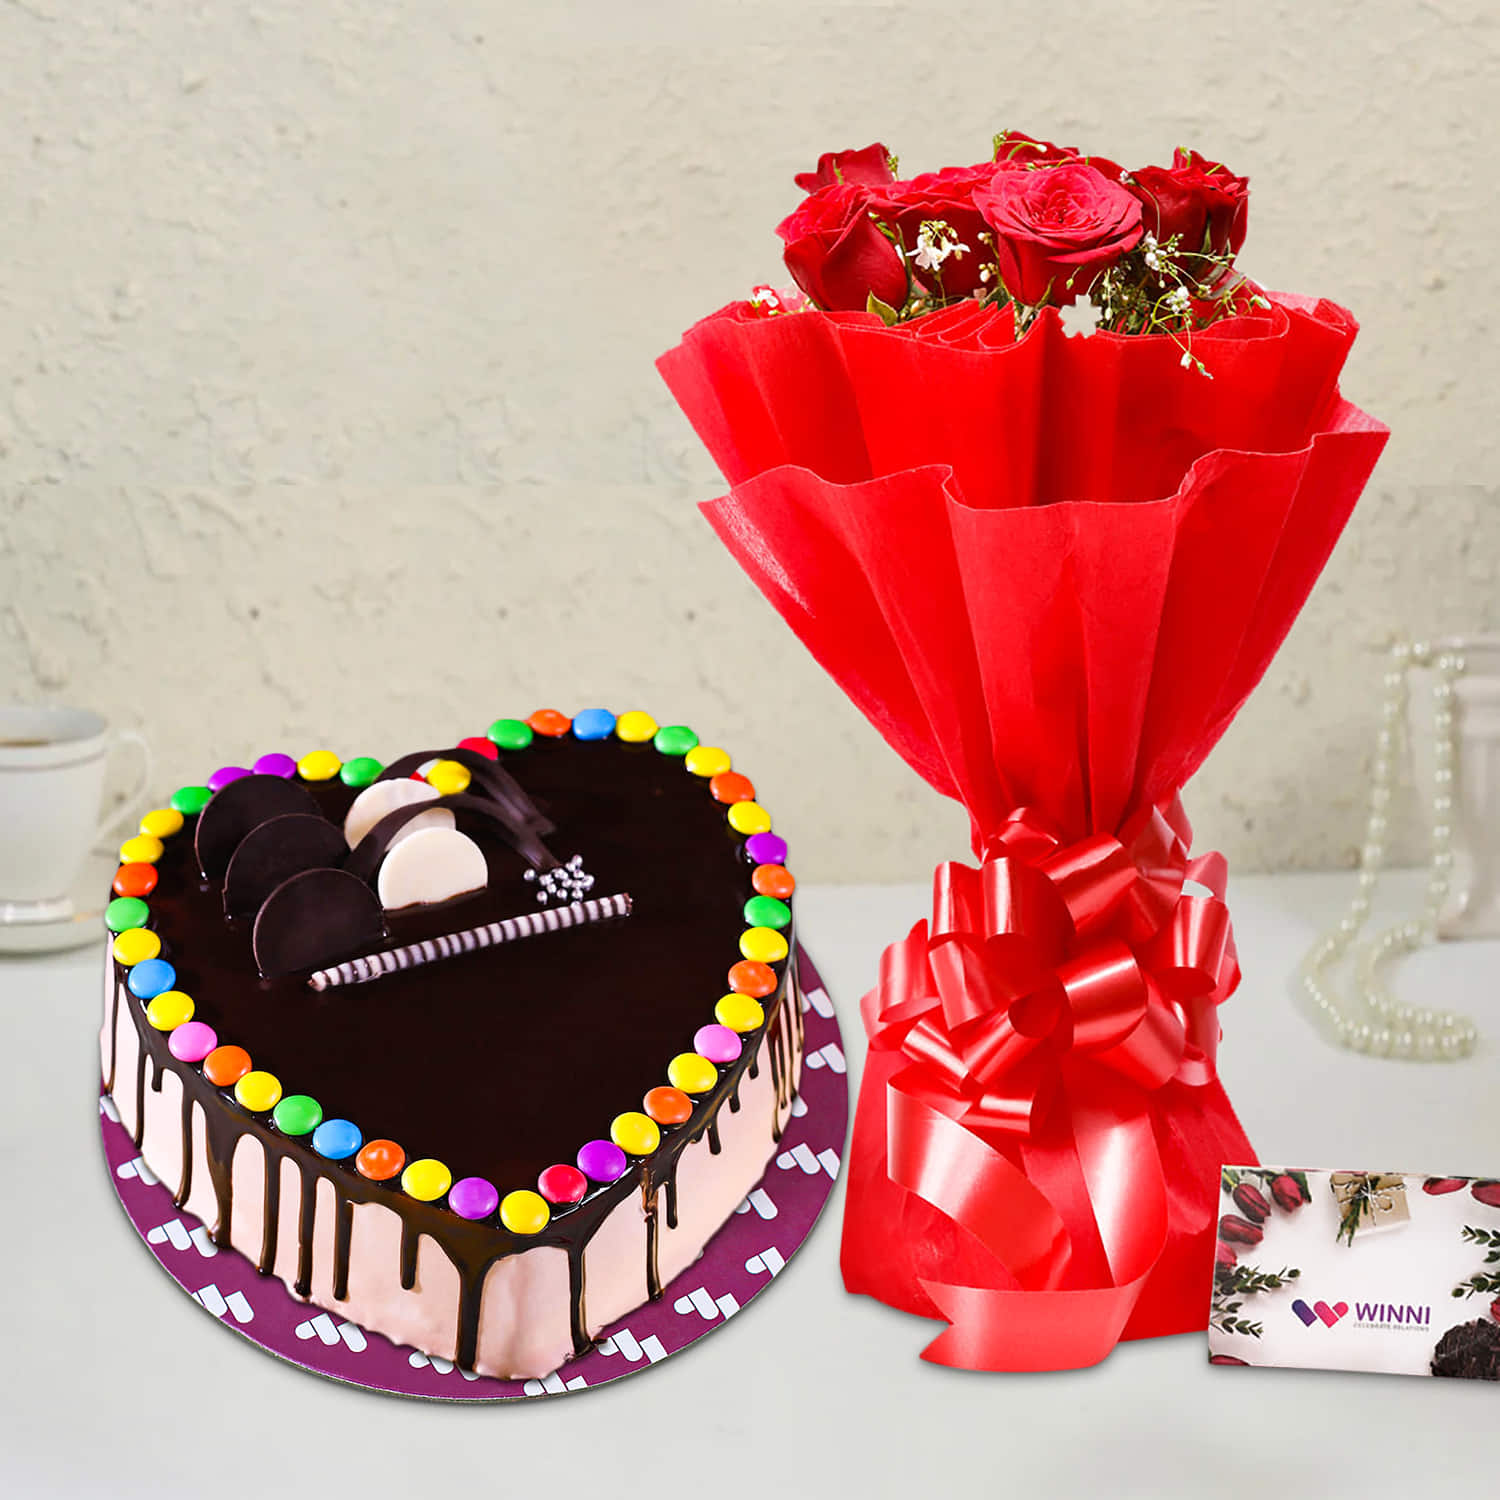 Anniversary Gifts Online | Wedding Anniversary Gifts in India - GiftaLove